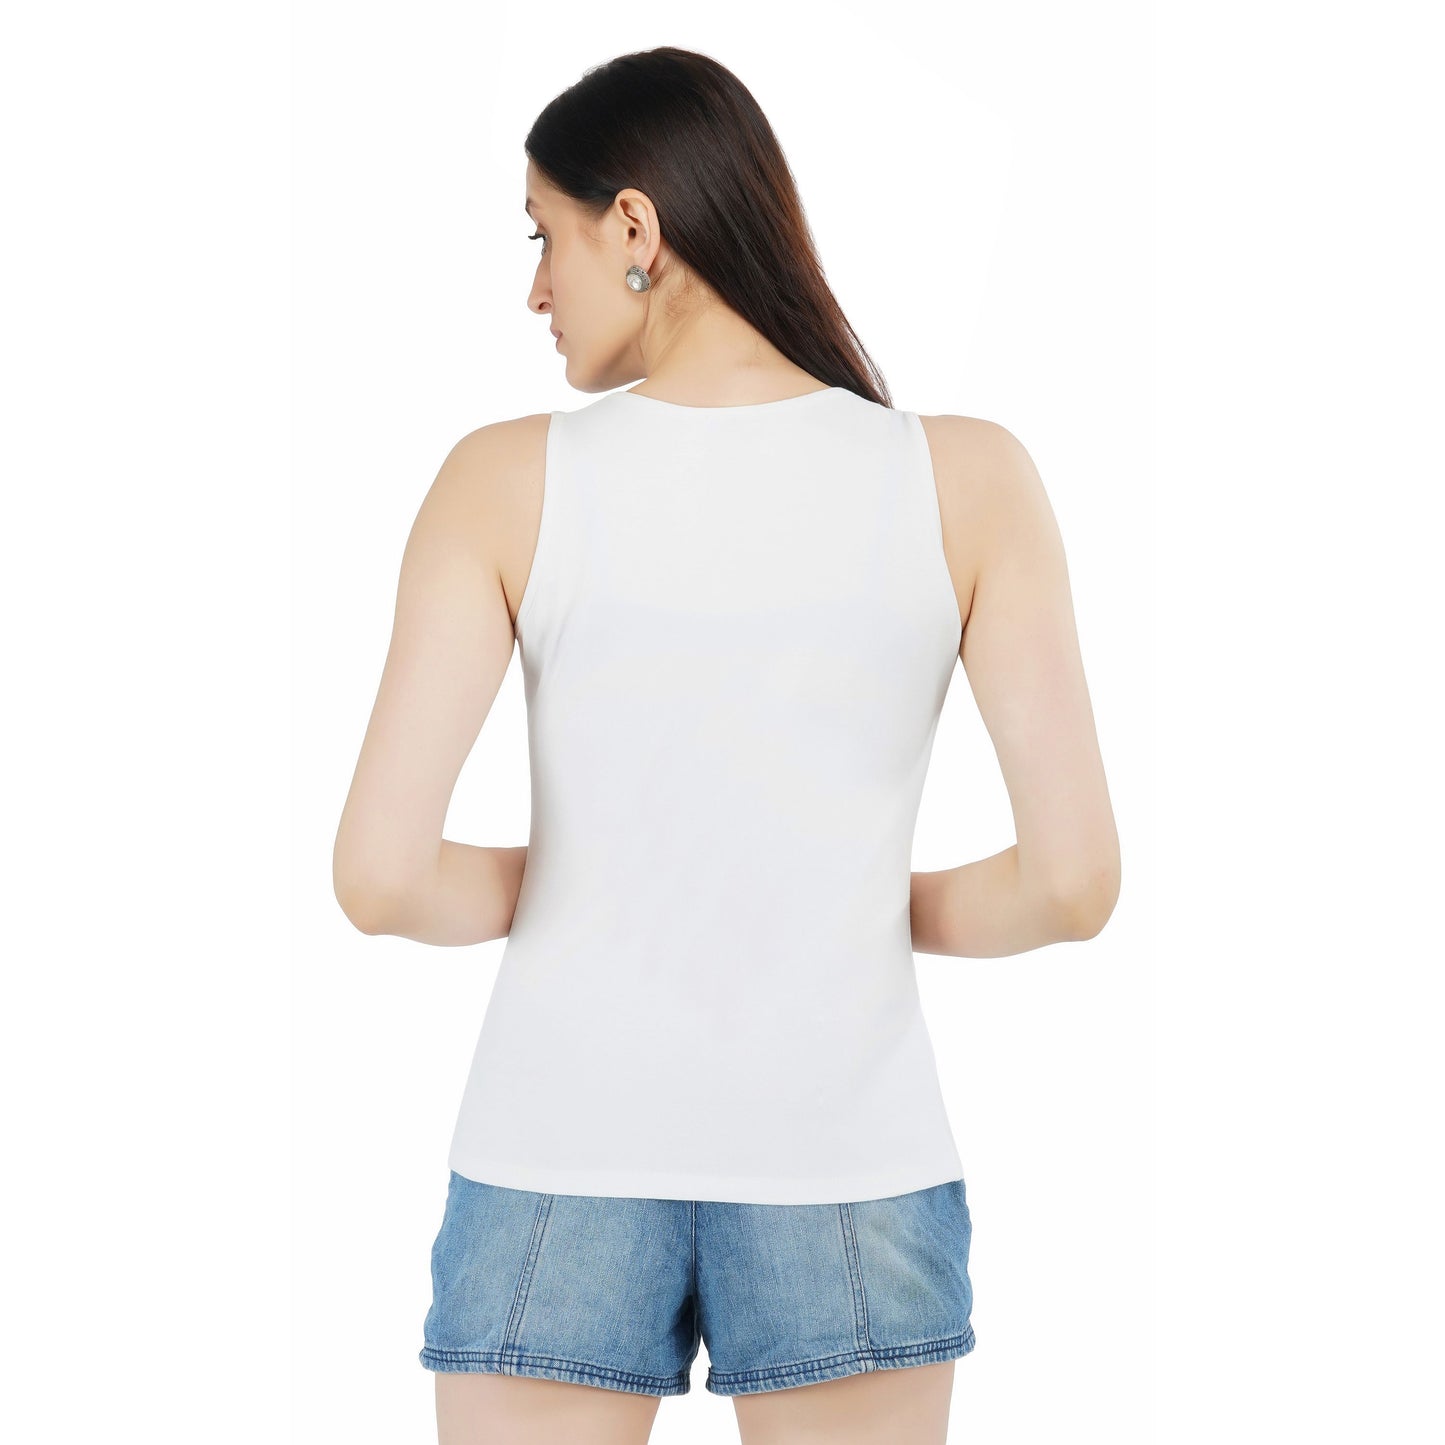 SLAY. Women's Silver Crystal Embellished Tank Top-clothing-to-slay.myshopify.com-Top